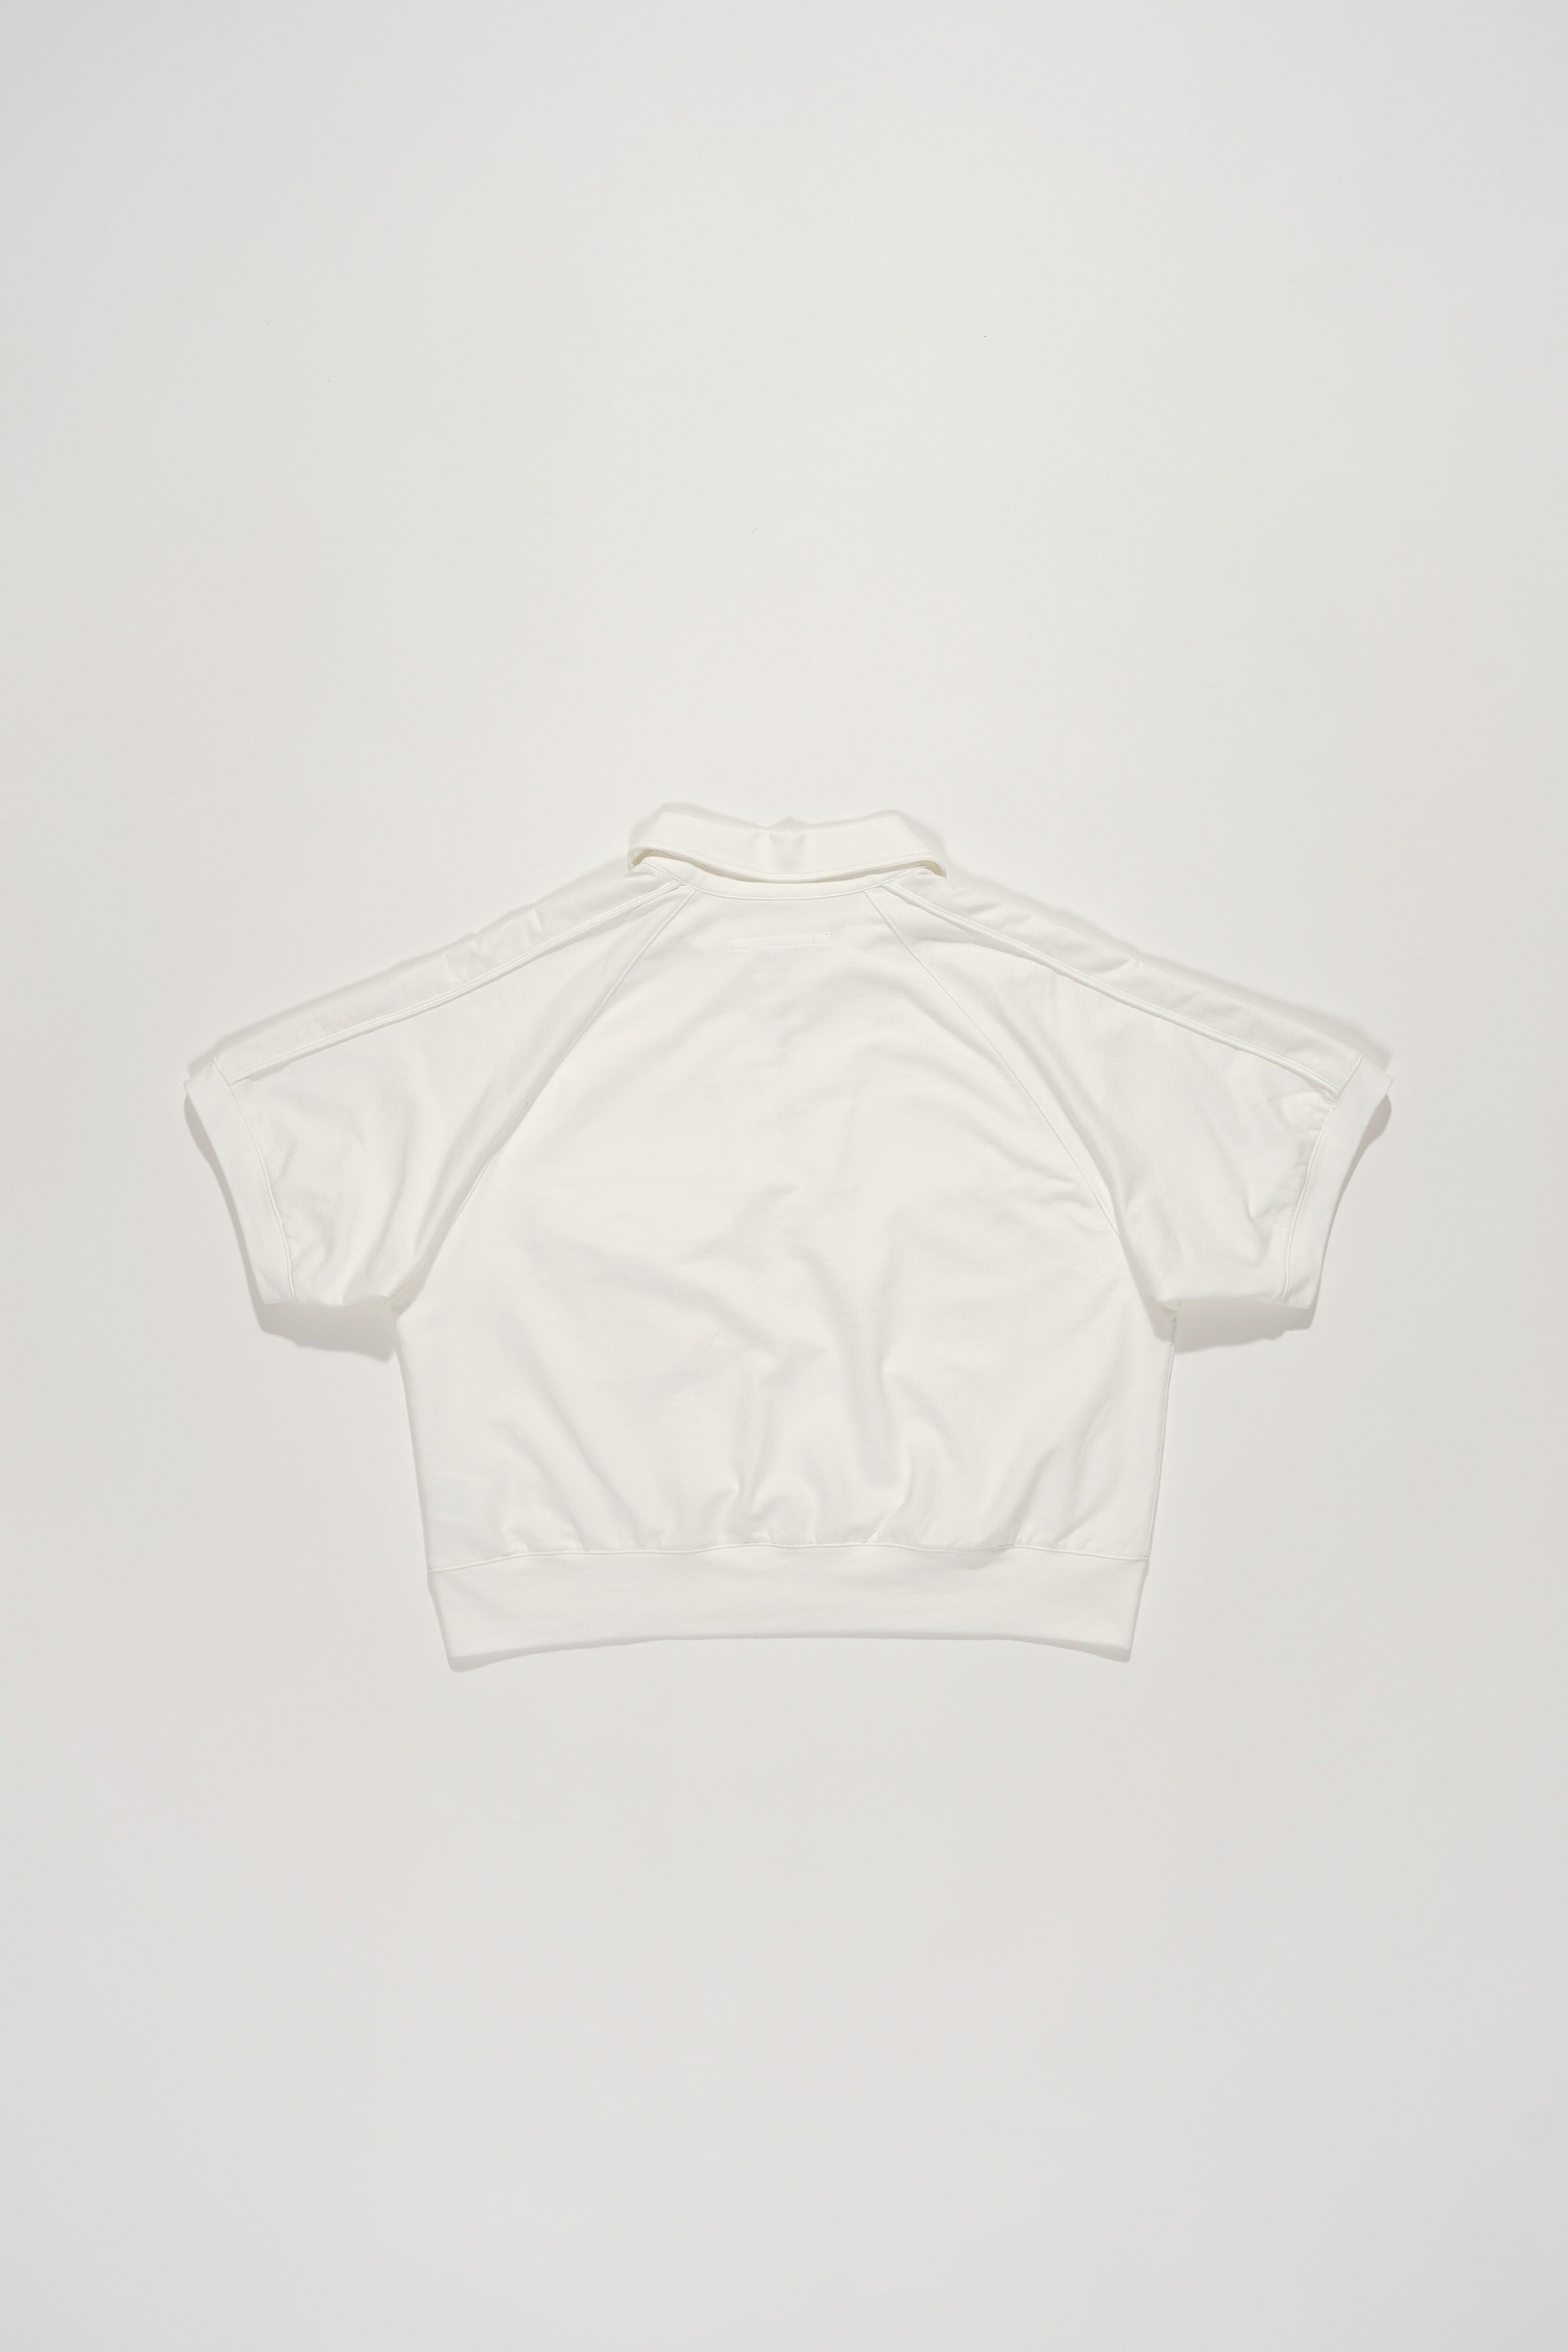 Sport Rag Knit - Off-White Solid PC Jersey